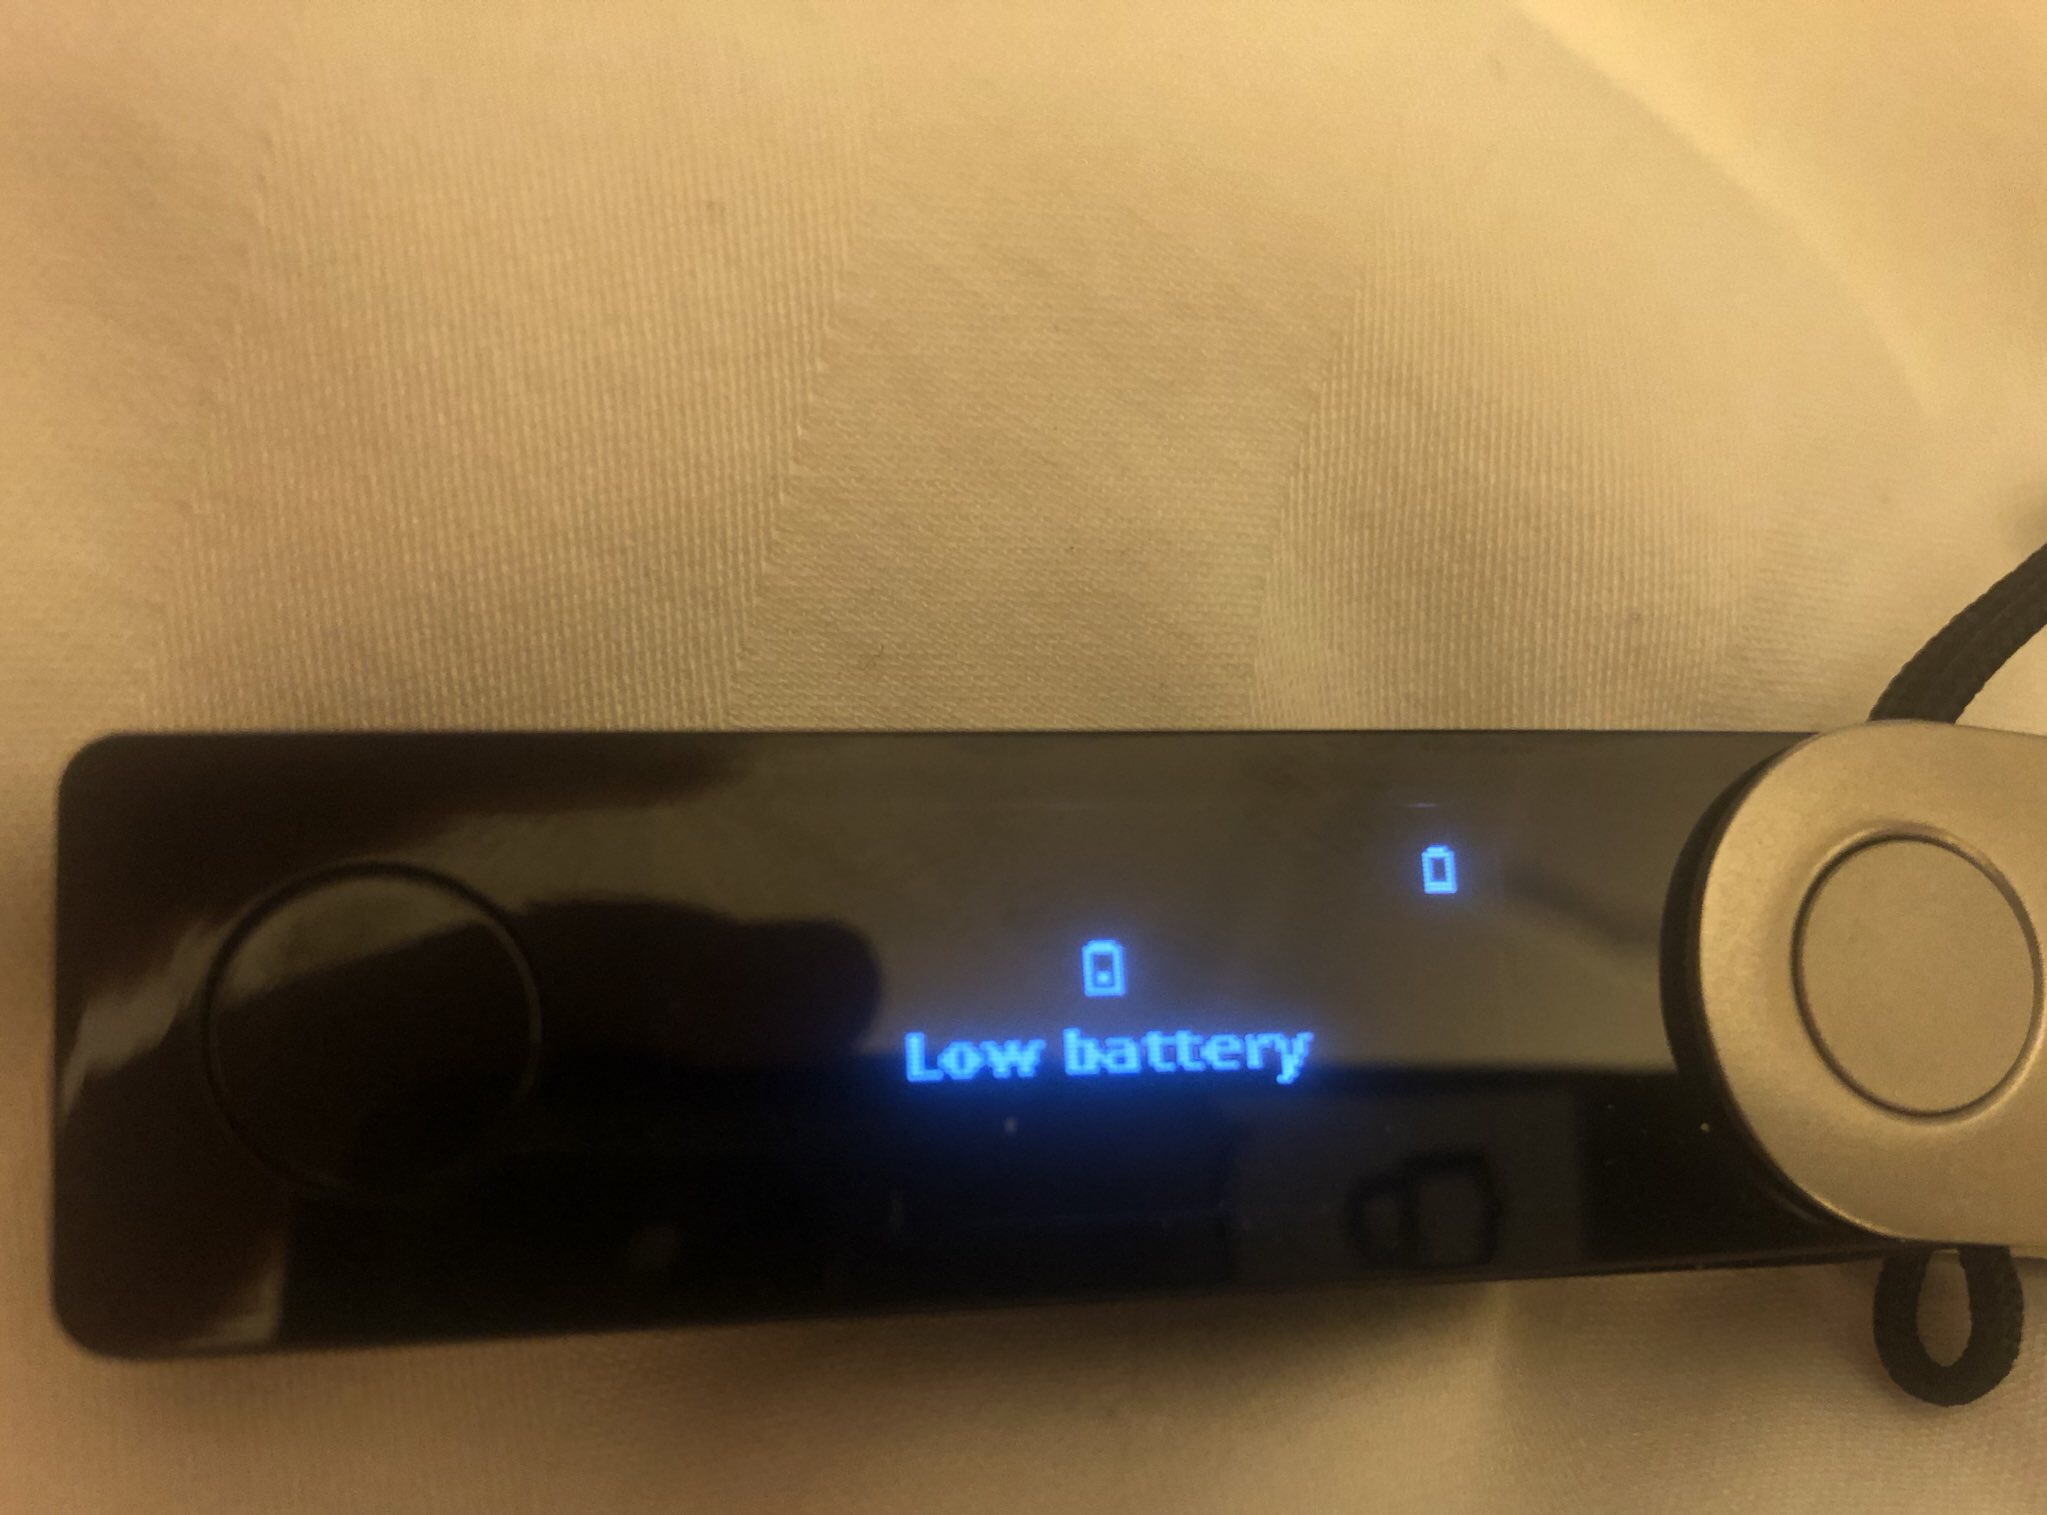 Low battery after unboxing